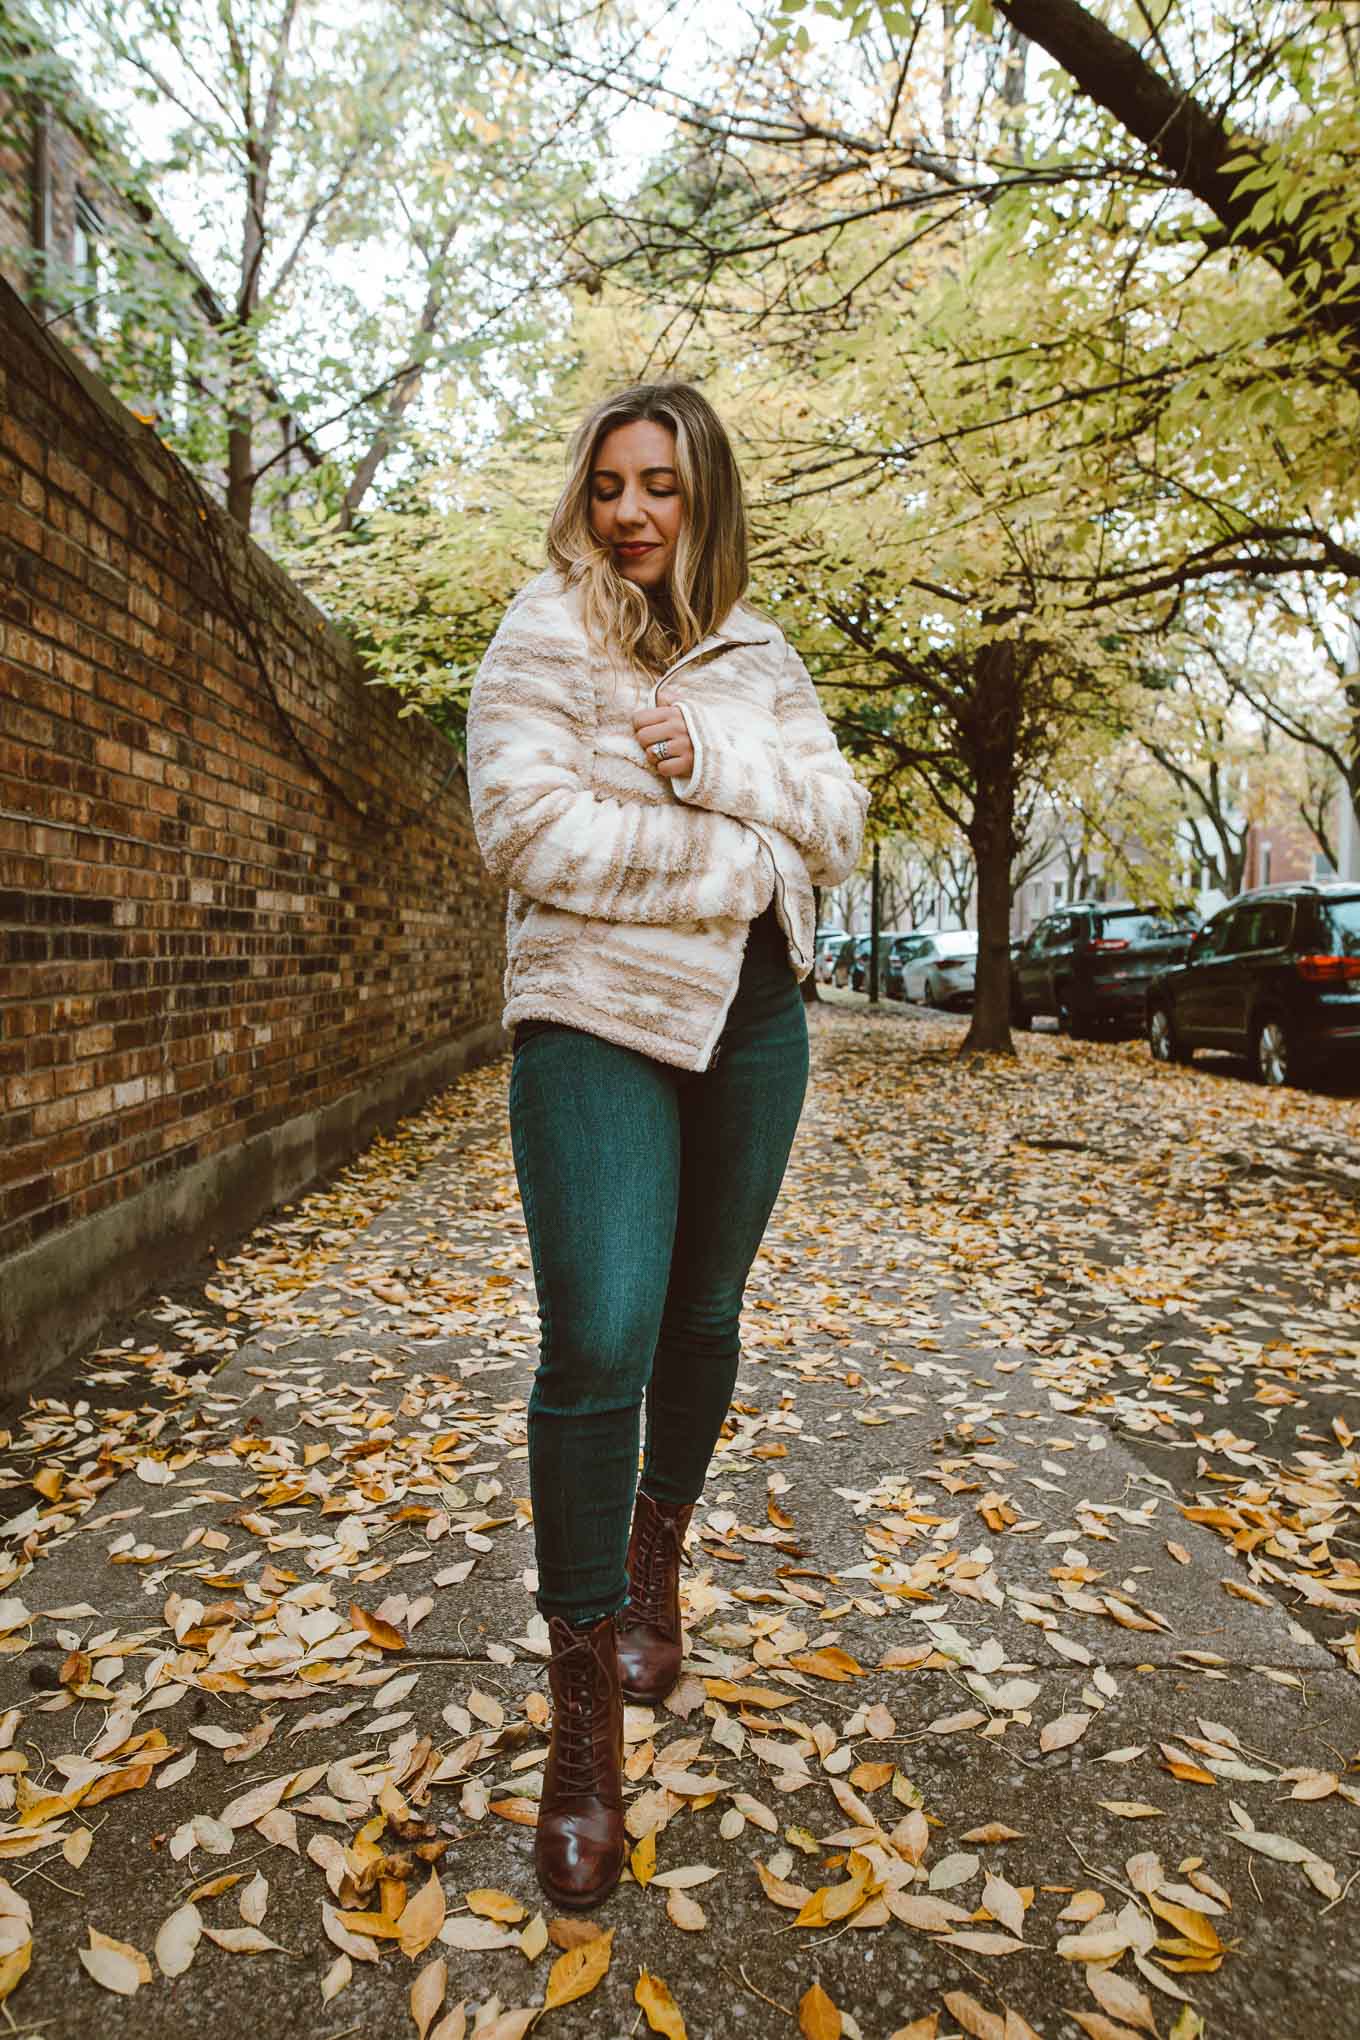 Sherpa Clothing by popular Chicago fashion blog, Glass of Glam: image of a woman walking through some leaves and wearing a red shirt, Old Navy Rockstar Jeans, Old Navy Cozy Sherpa Zip-Front Jacket for Women, and Patricia Nash Womens Sicily Leather Closed Toe Ankle Fashion Boots.